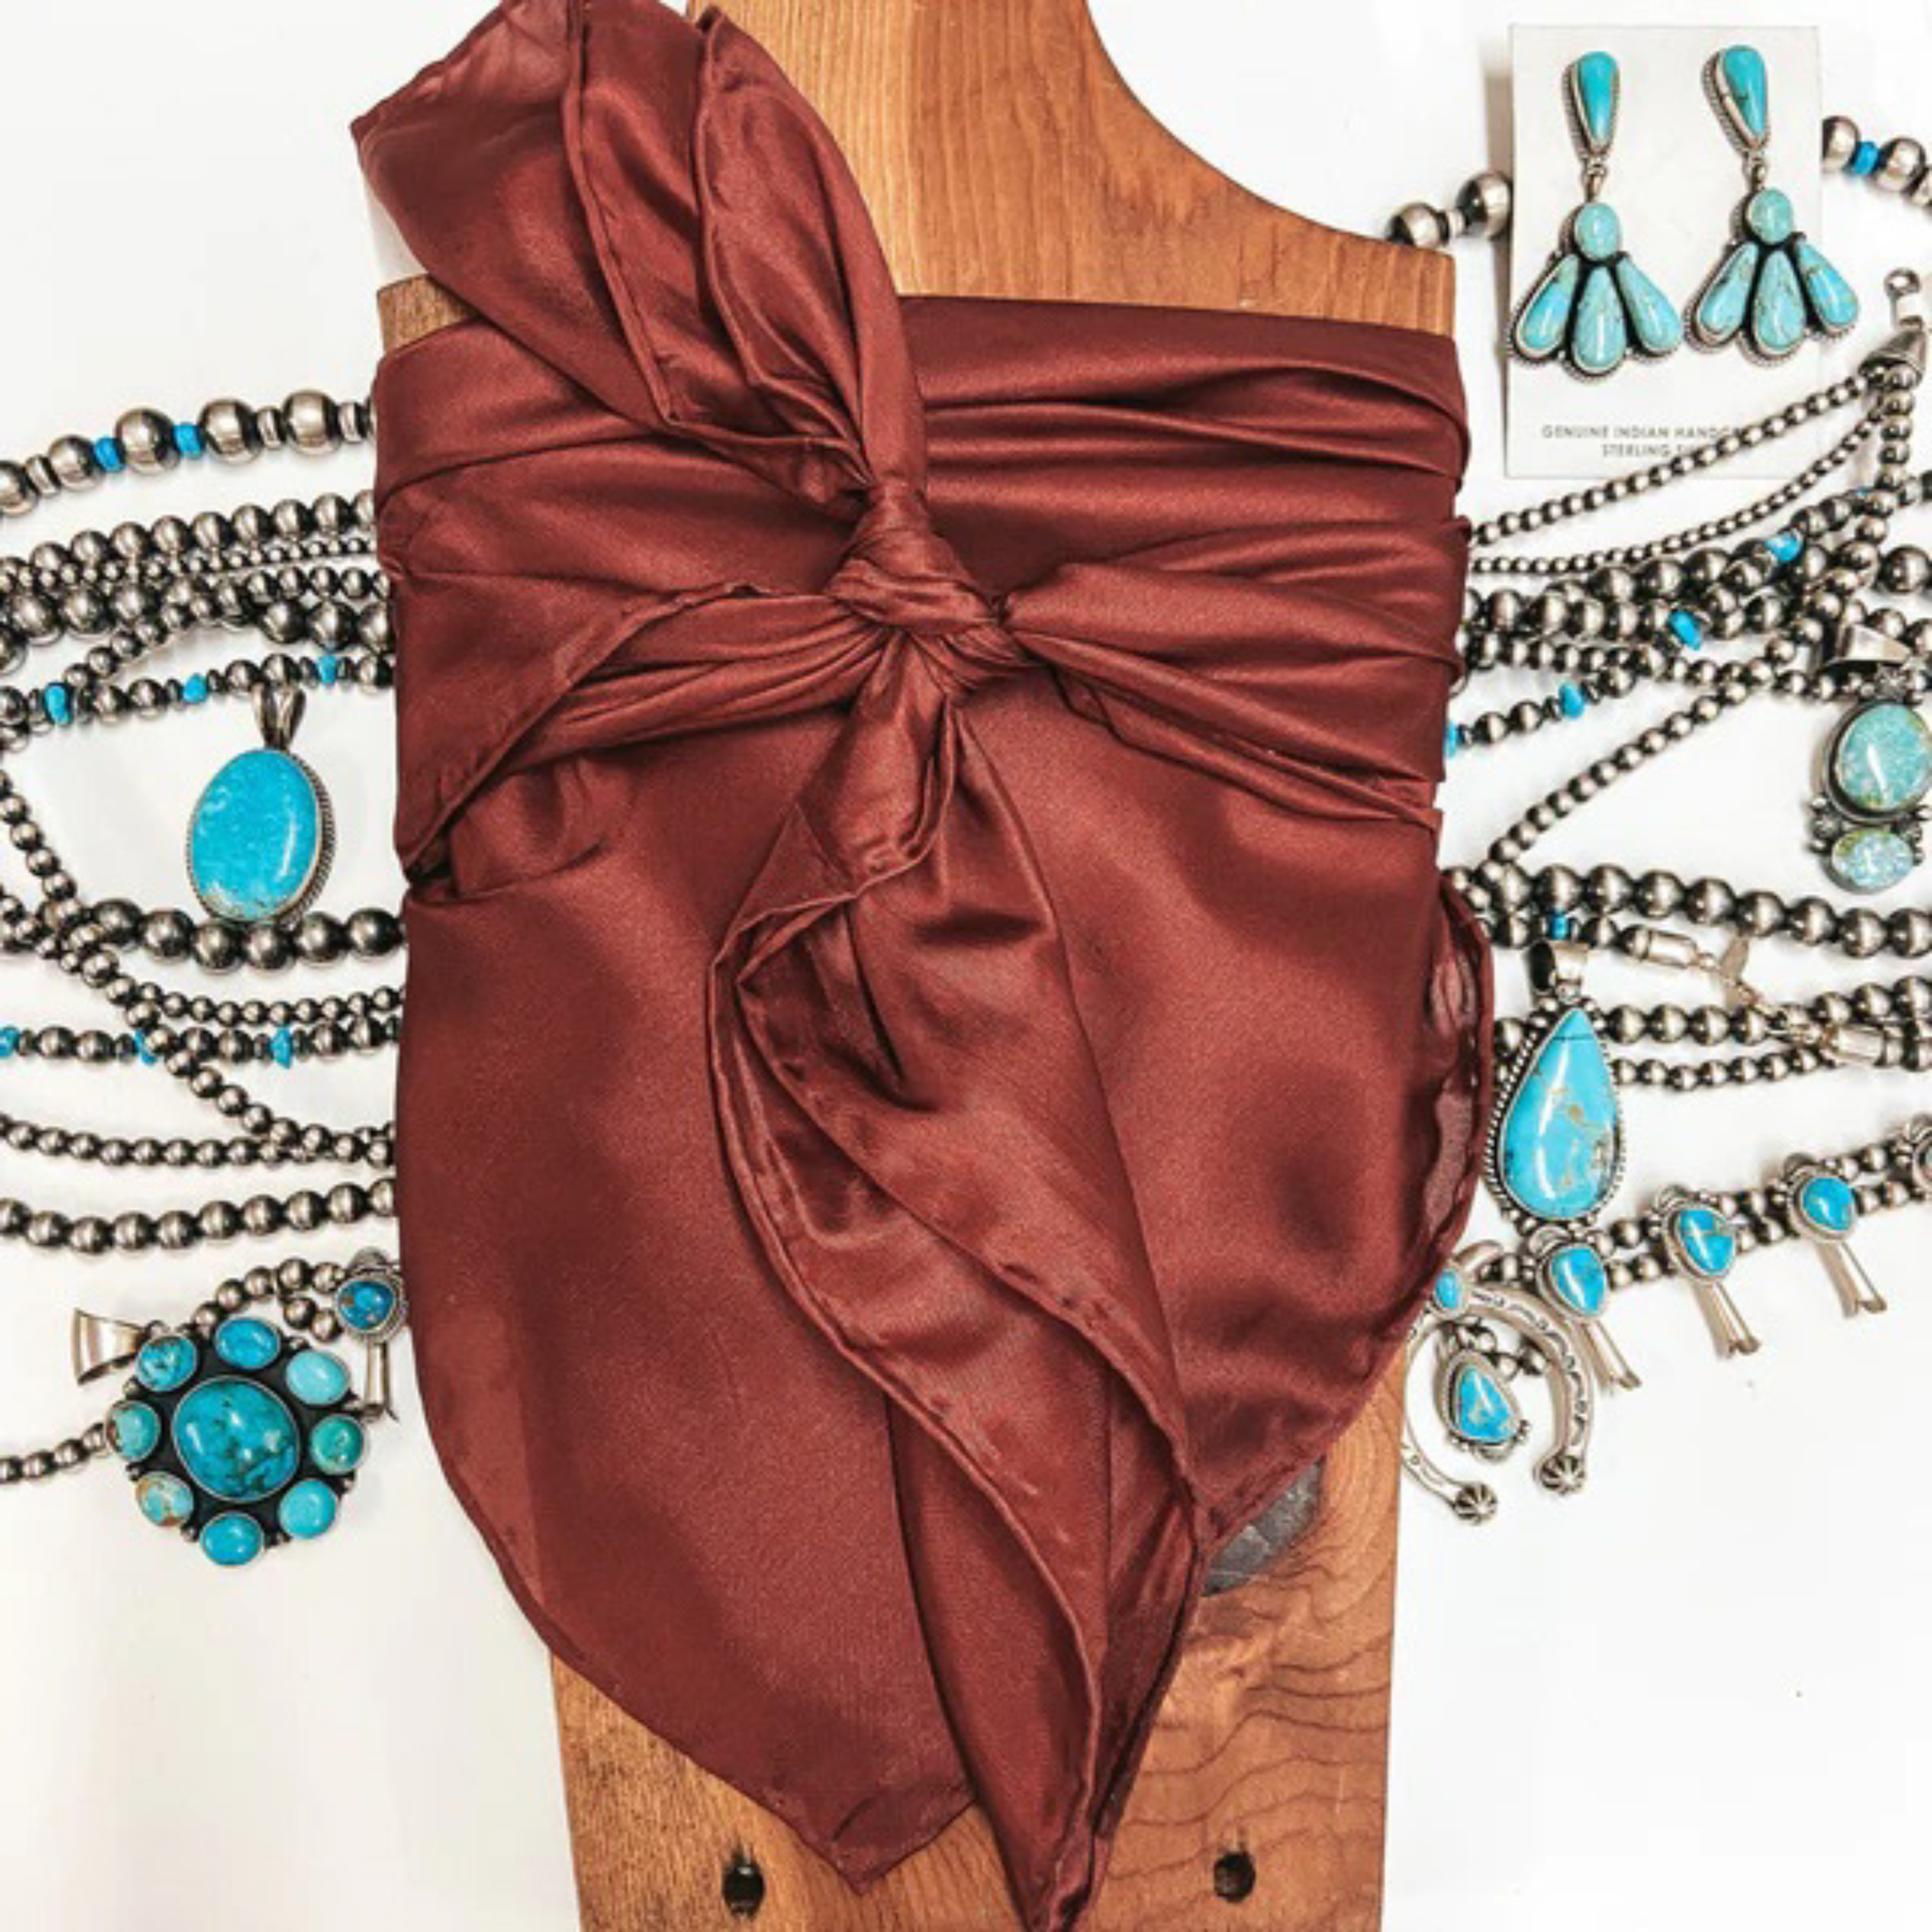 A solid color wild rag tied around a wooden display. Pictured on white background with turquoise jewelry.